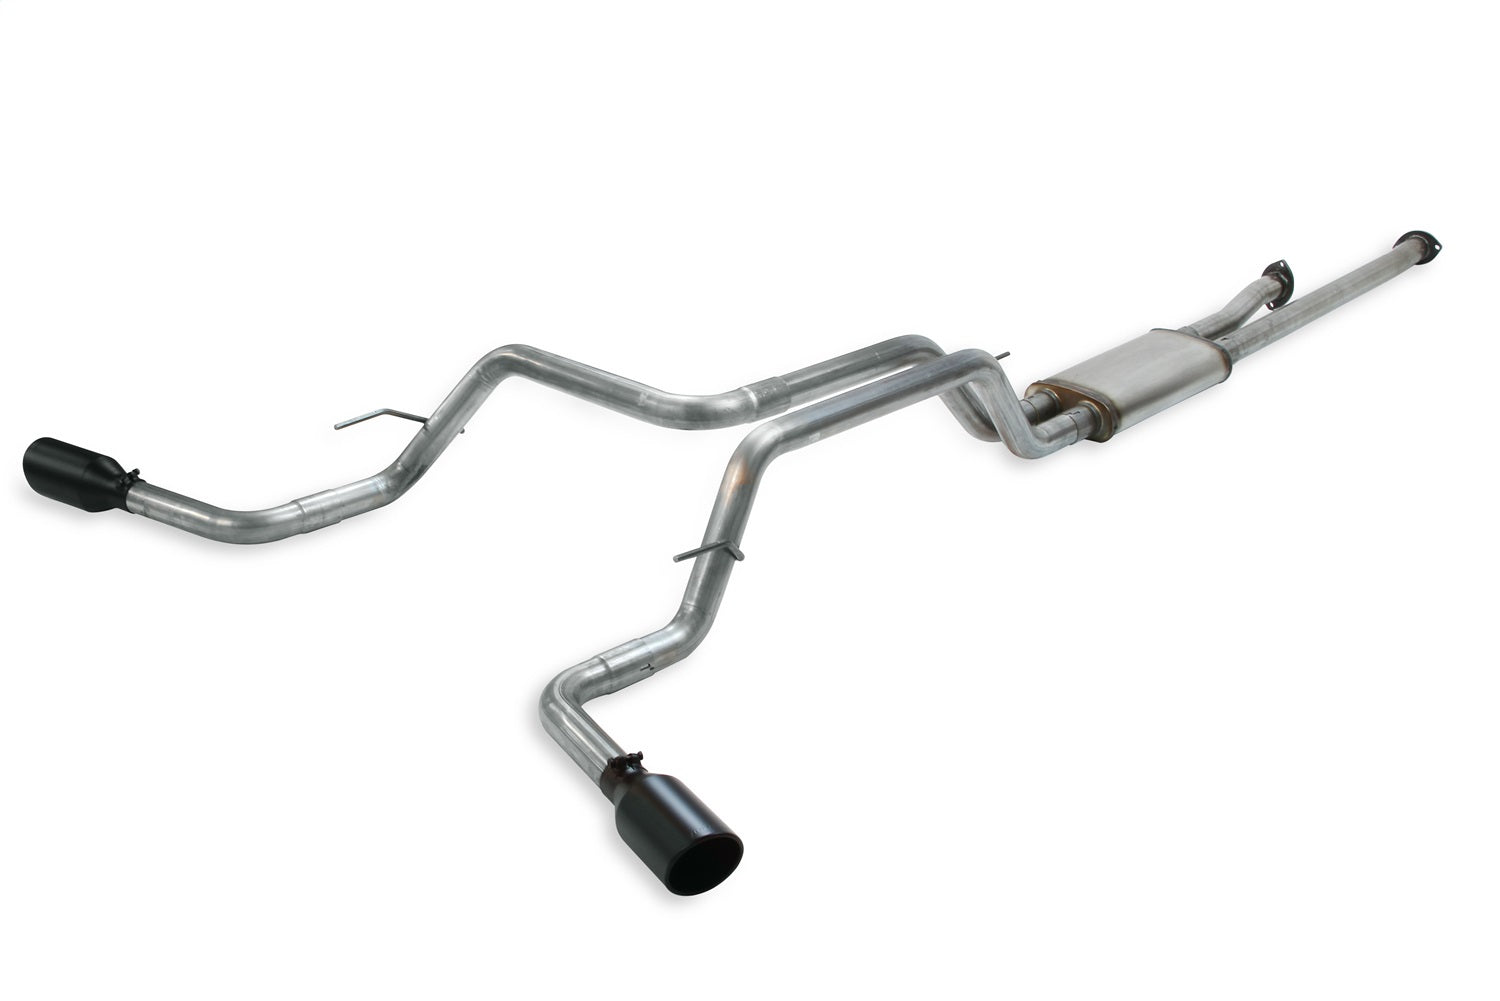 Flowmaster 717664 FlowFX Cat-Back Exhaust System Fits 09-21 Tundra